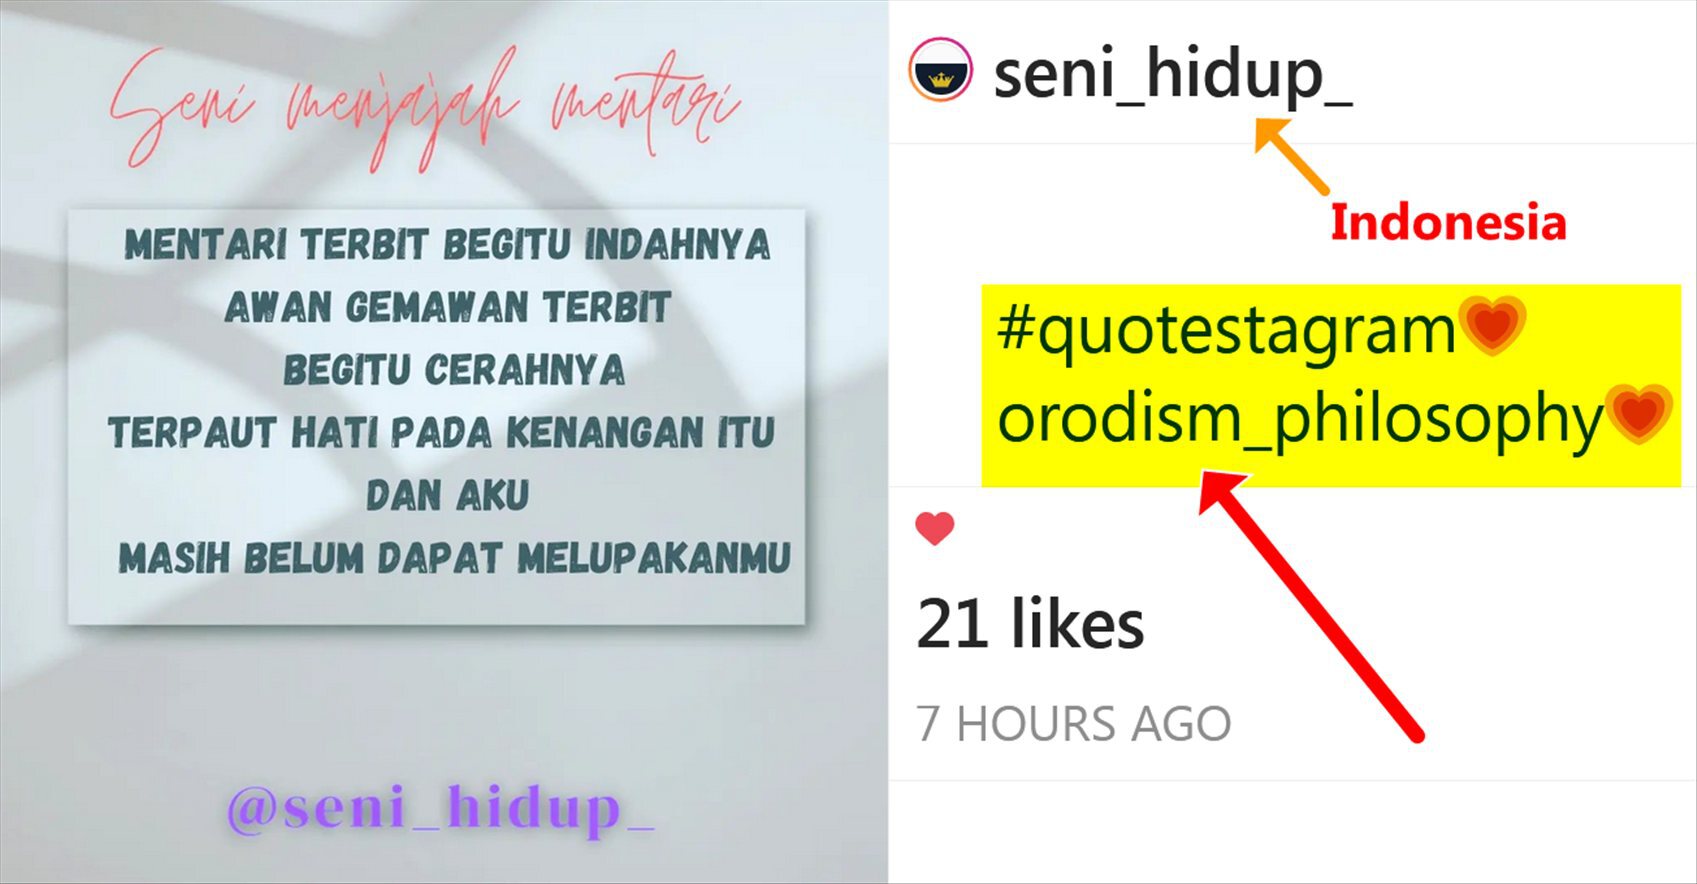 The philosophy of Orodism in Indonesia 6d6ed3f86c0c8a951249f6e6e4892996